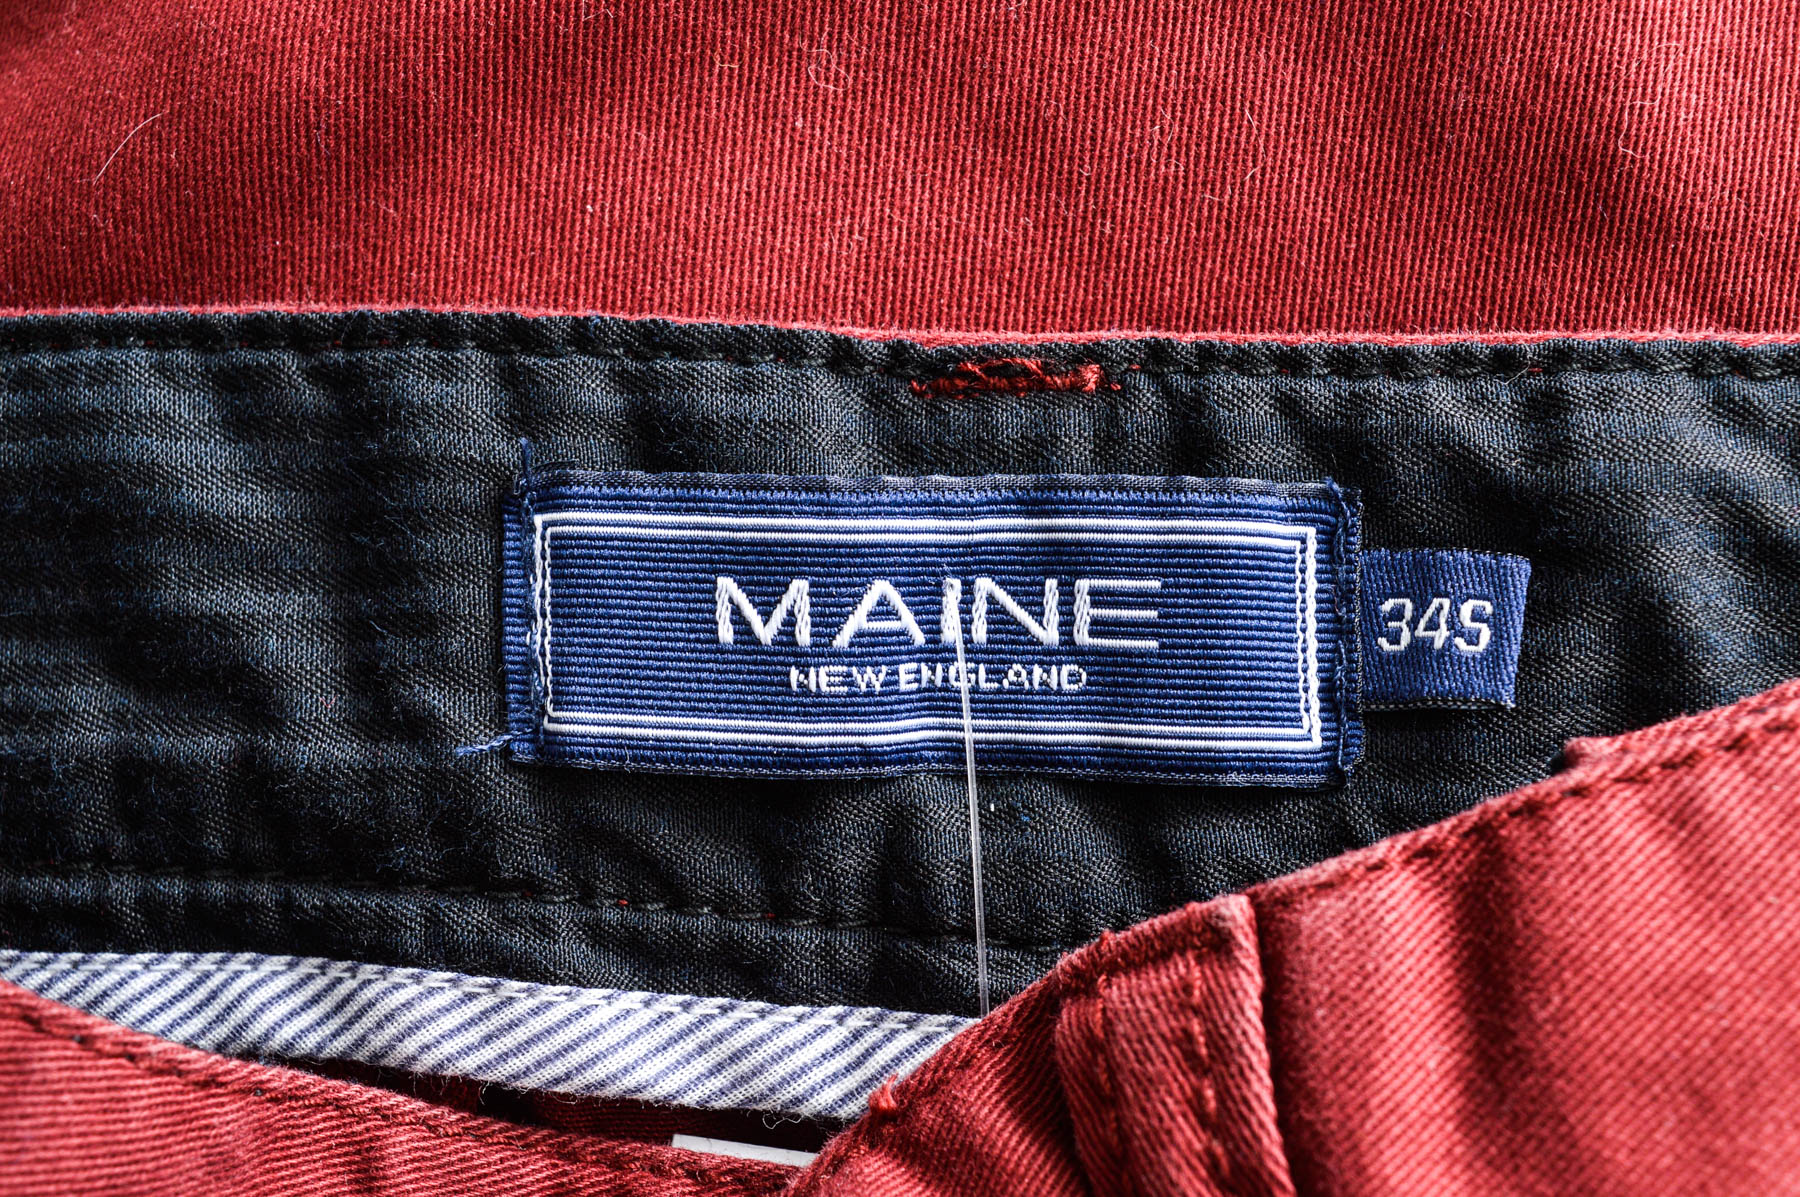 Men's trousers - MAINE NEW ENGLAND - 2